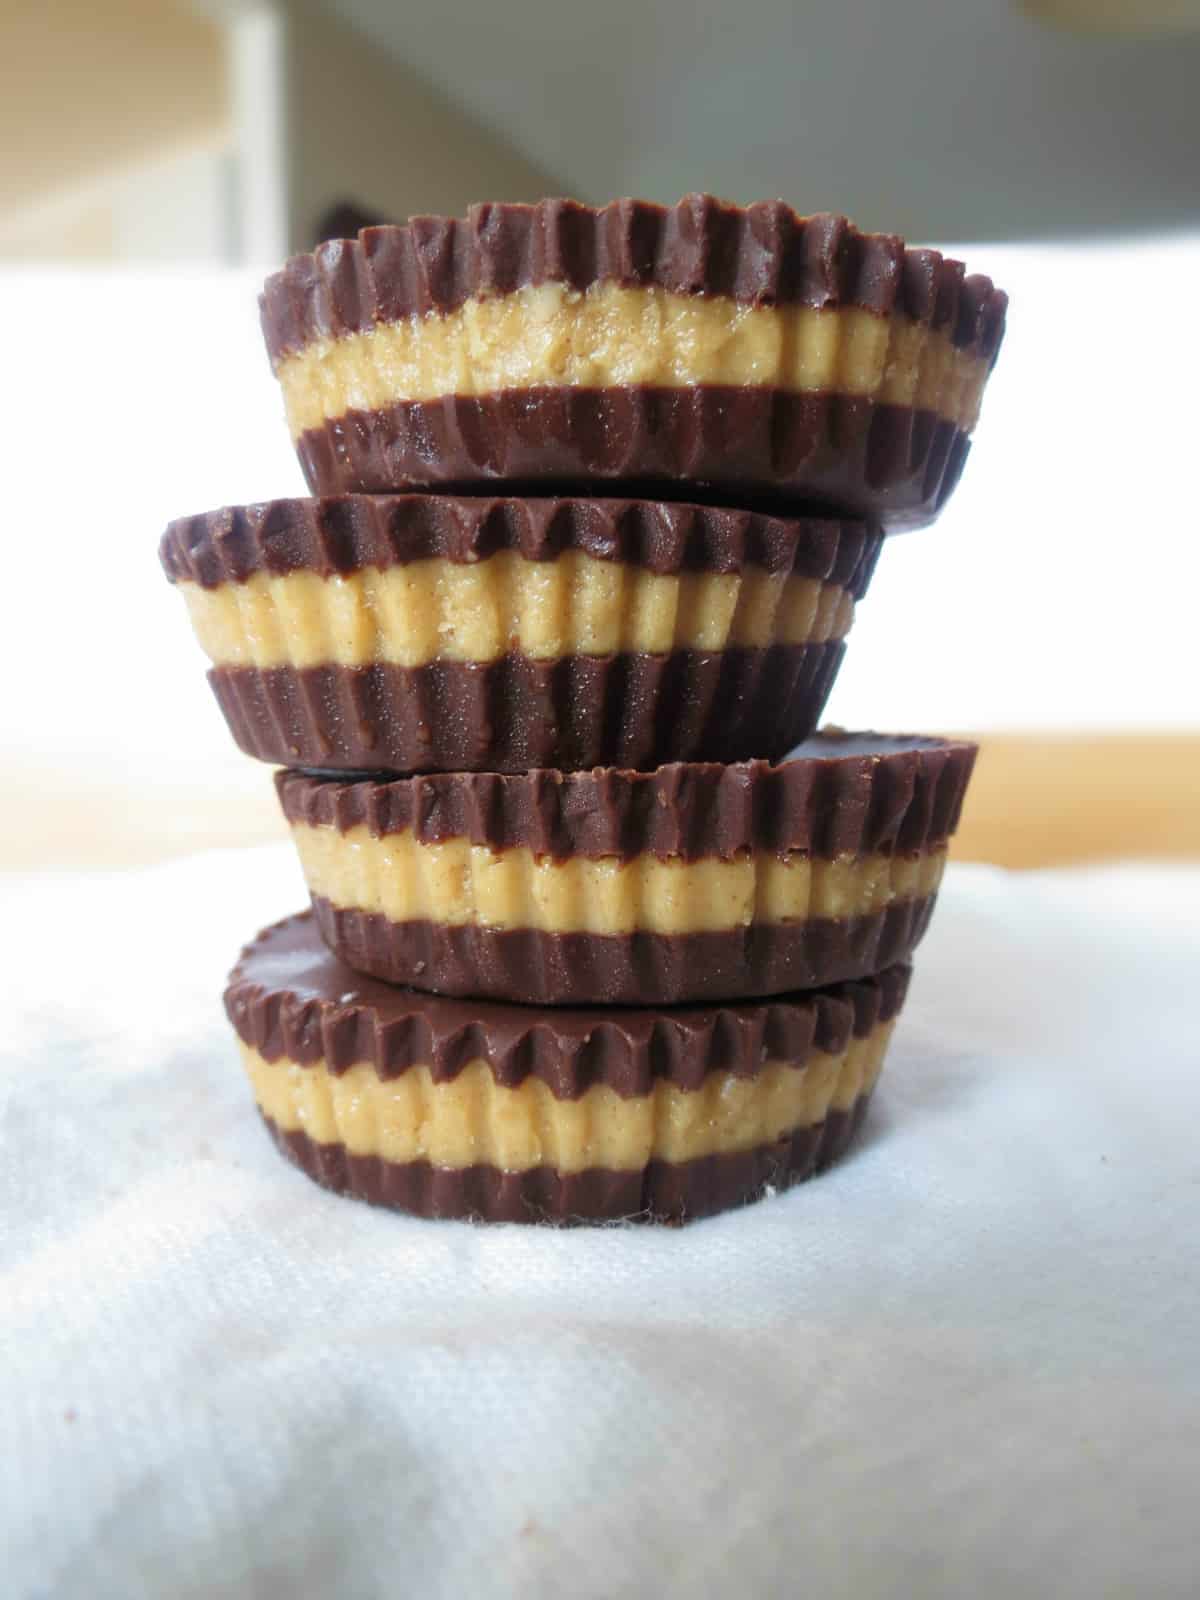 Homemade Reese's Peanut Butter Cups - Sprinkle Some Sugar
